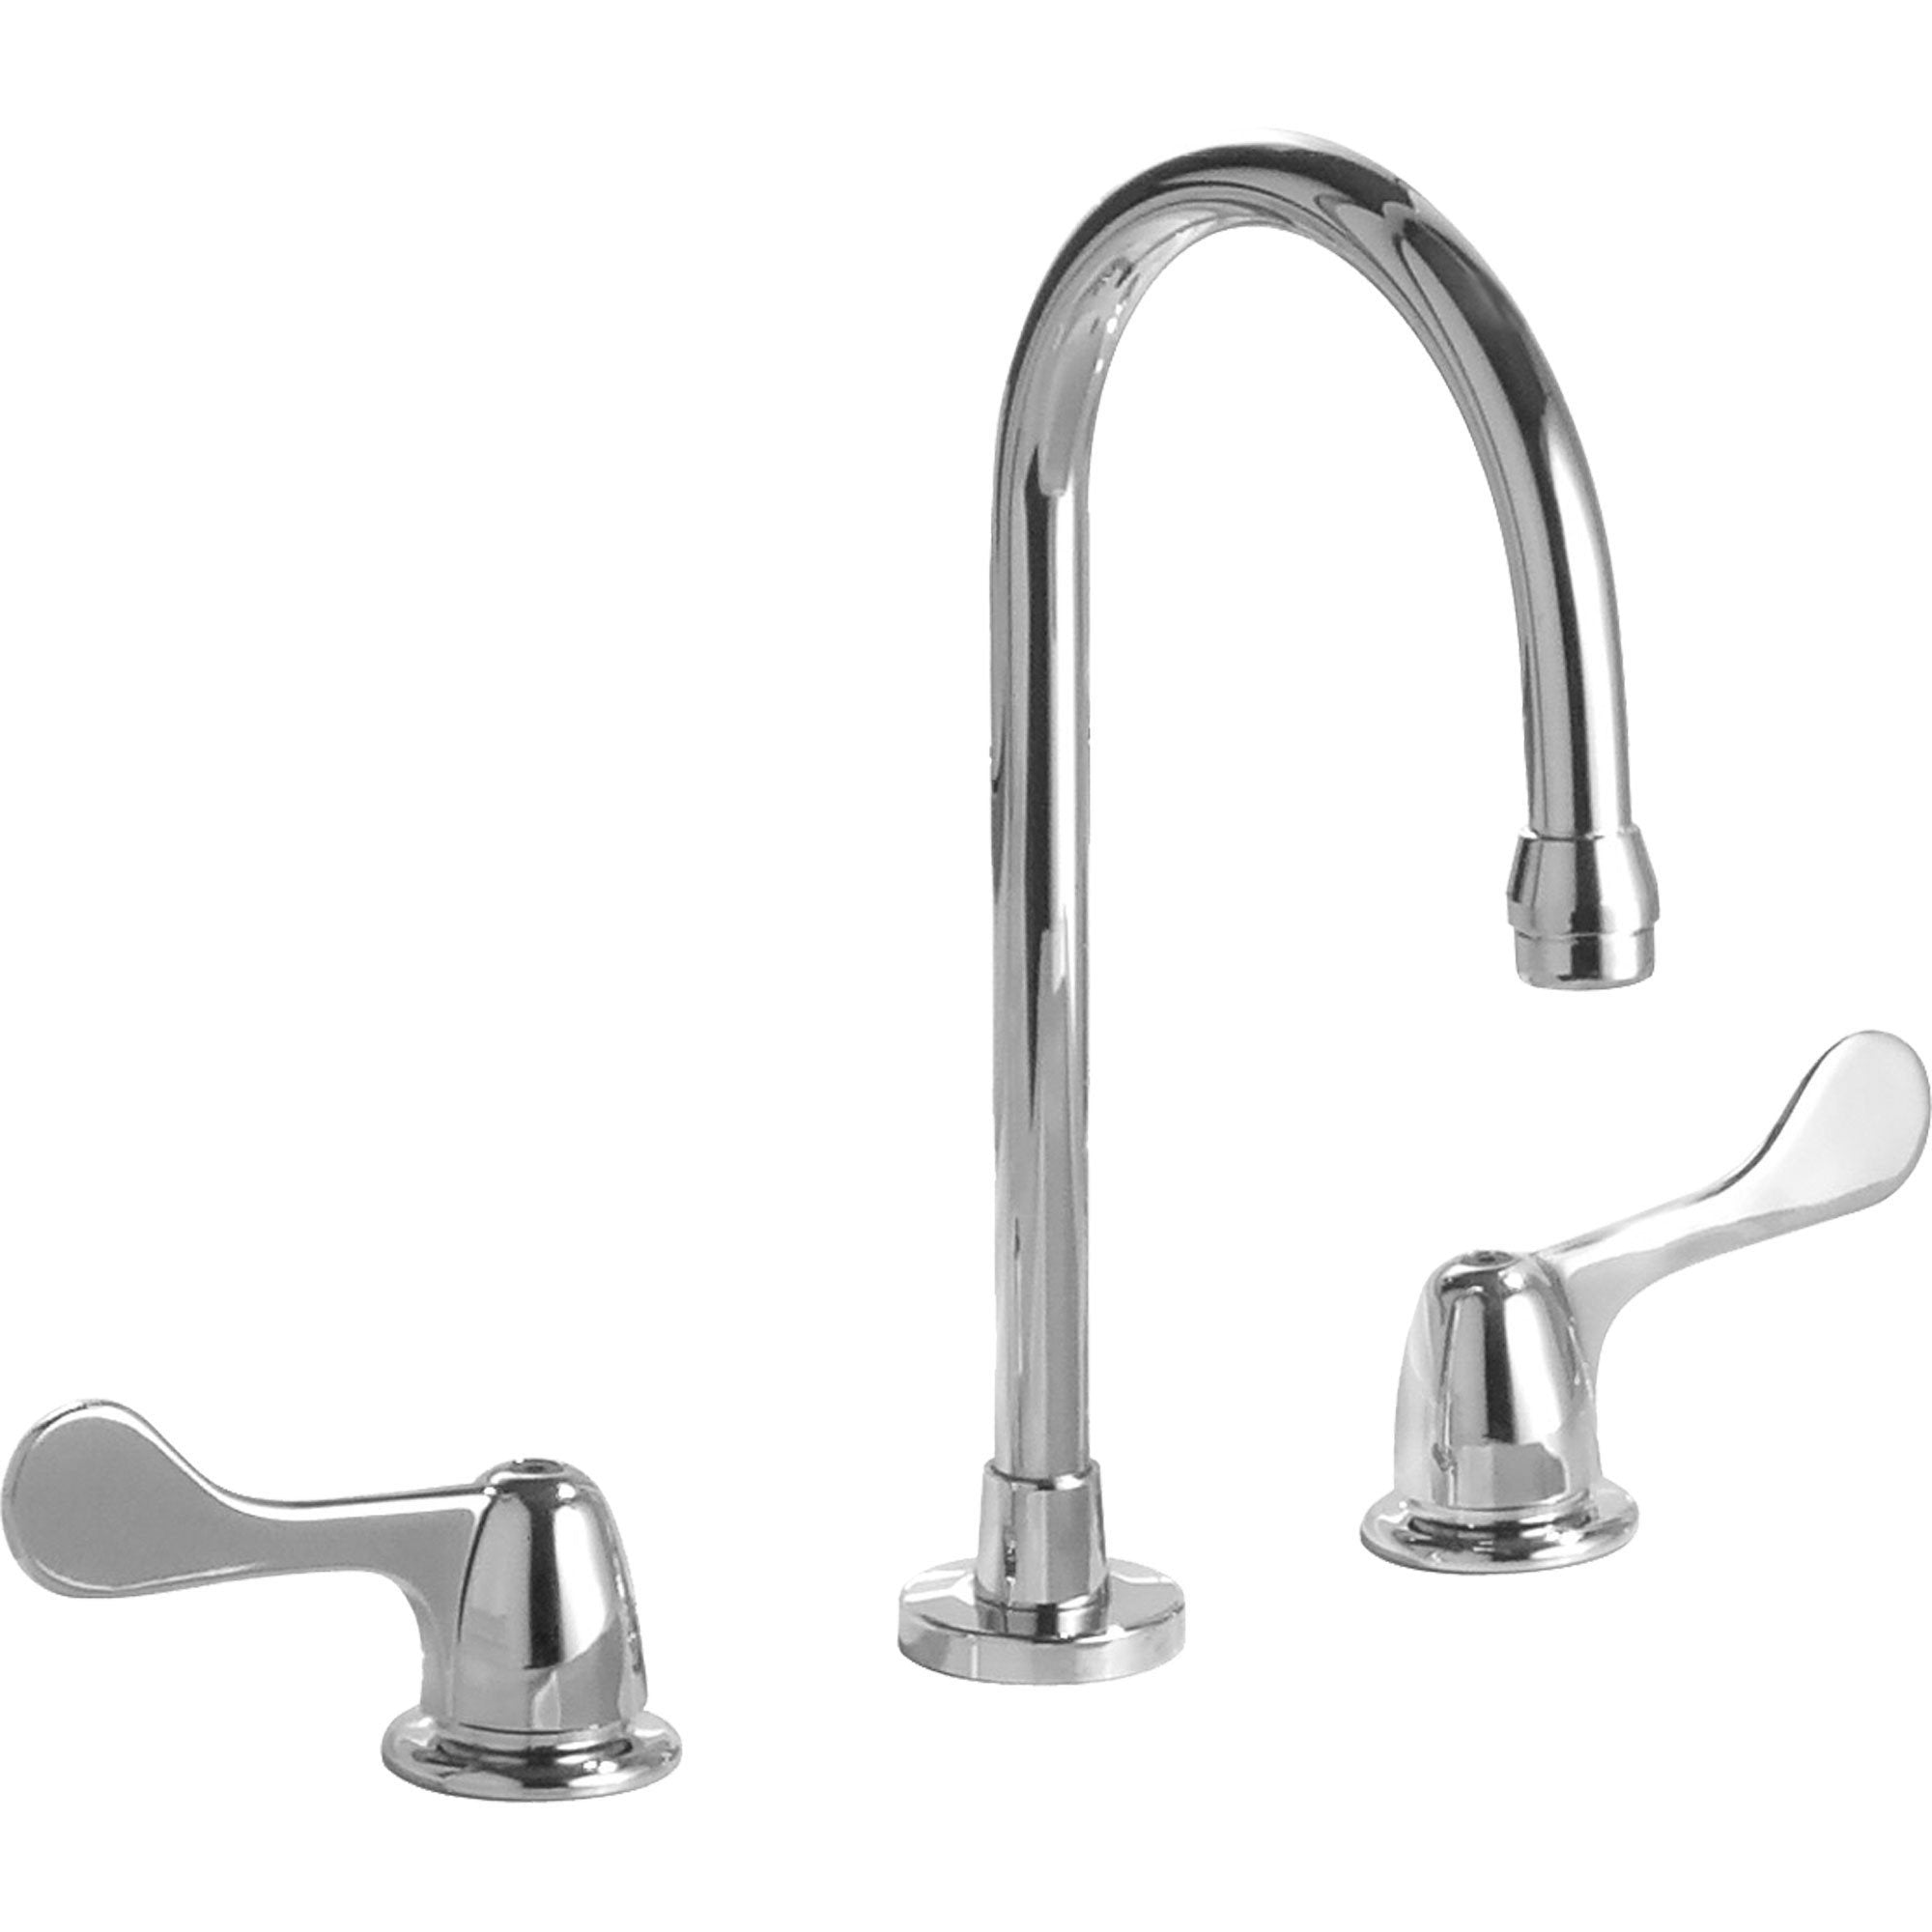 Delta Commercial Widespread 2-Handle High Arc Bathroom Faucet in Chrome 614926